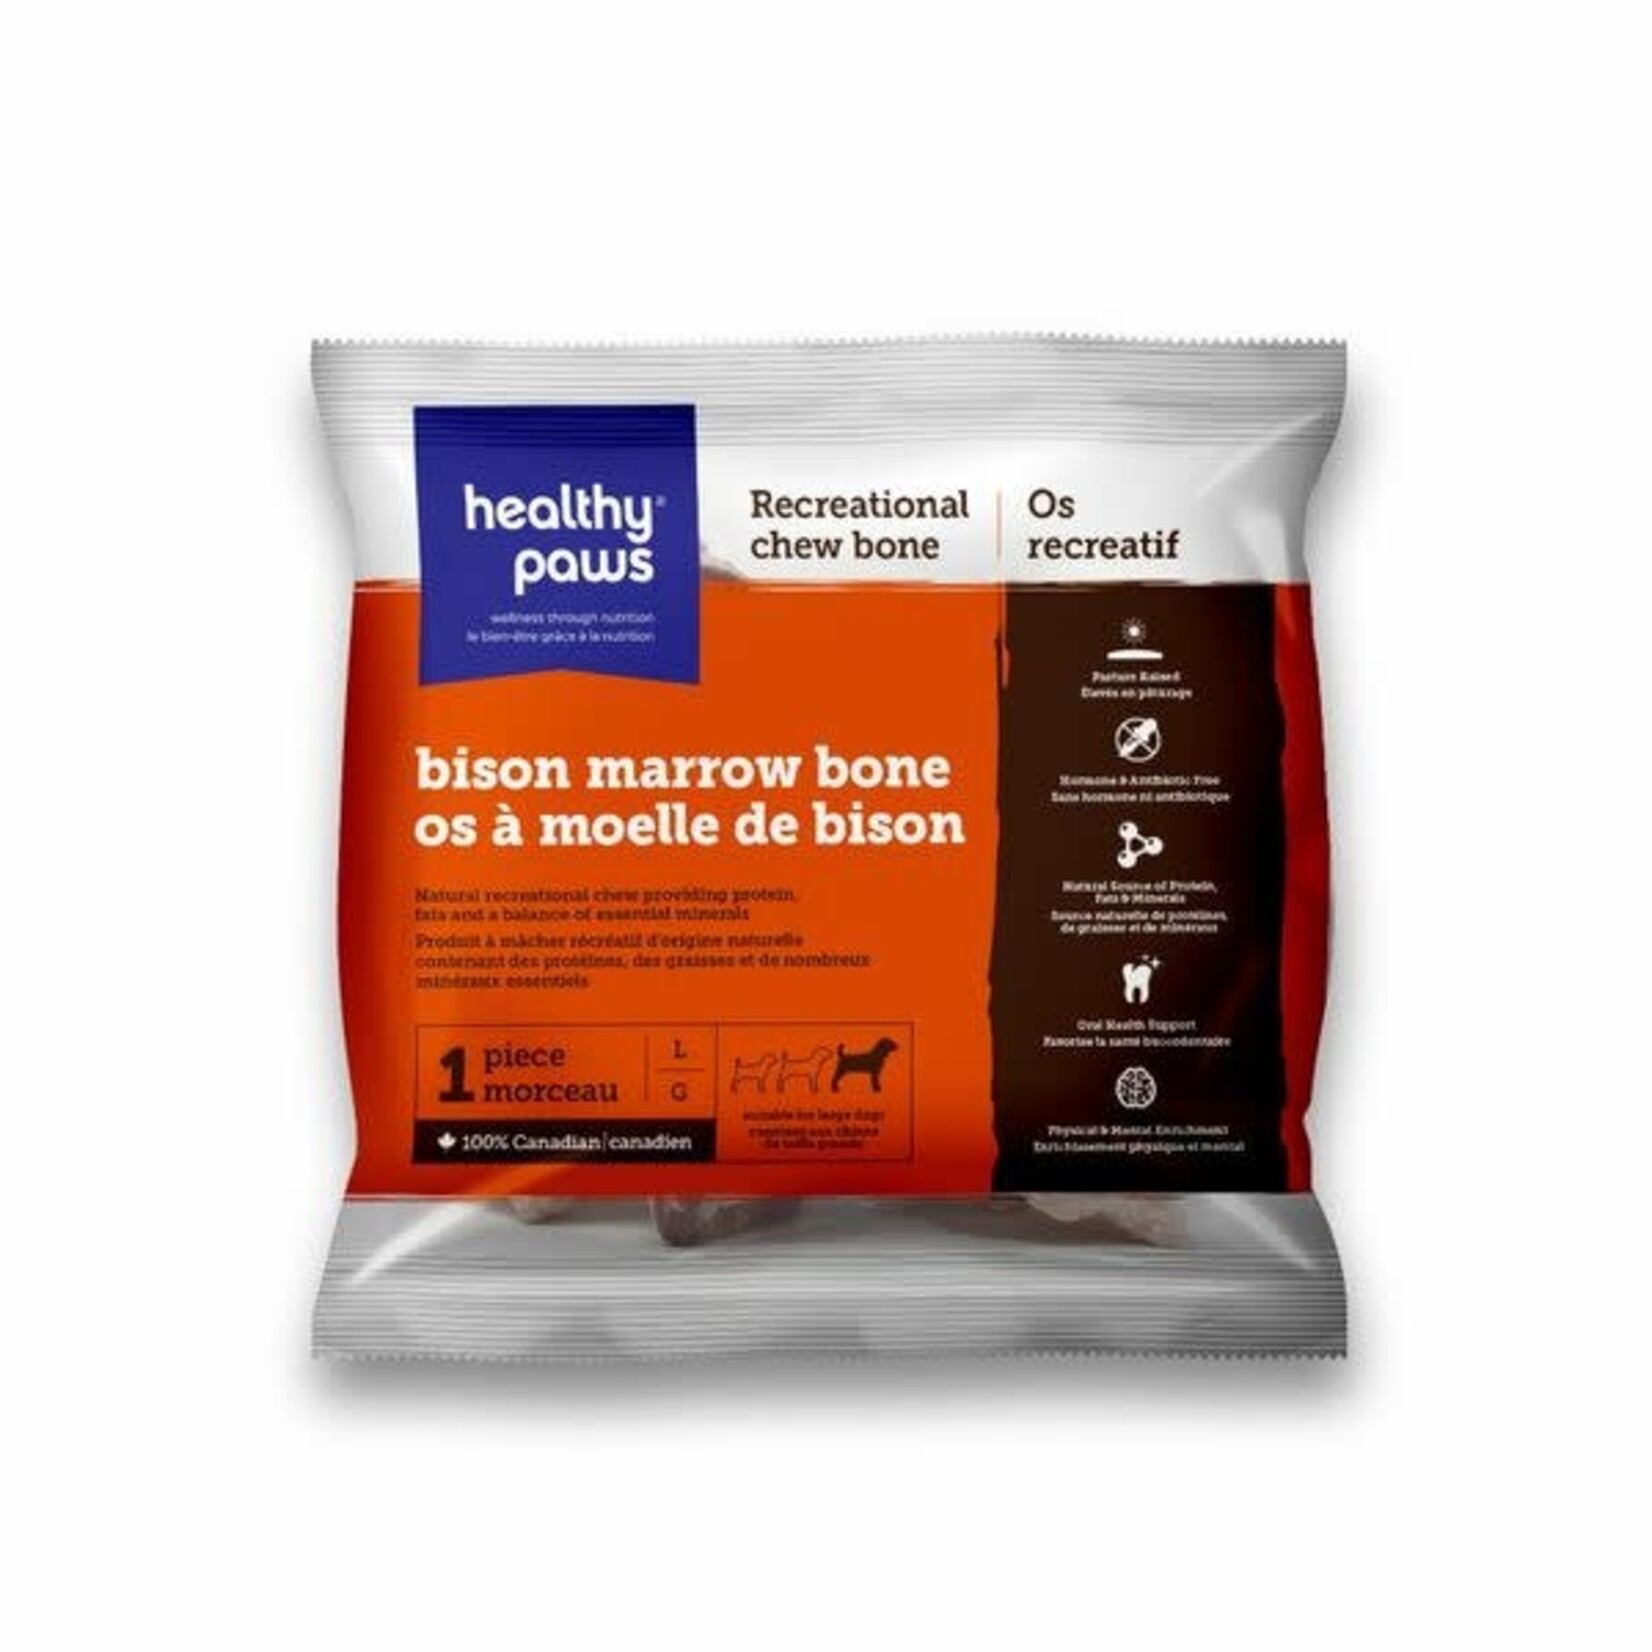 Healthy paws HEALTHY PAWS | Frozen Recreational Bison Marrow Bone Large